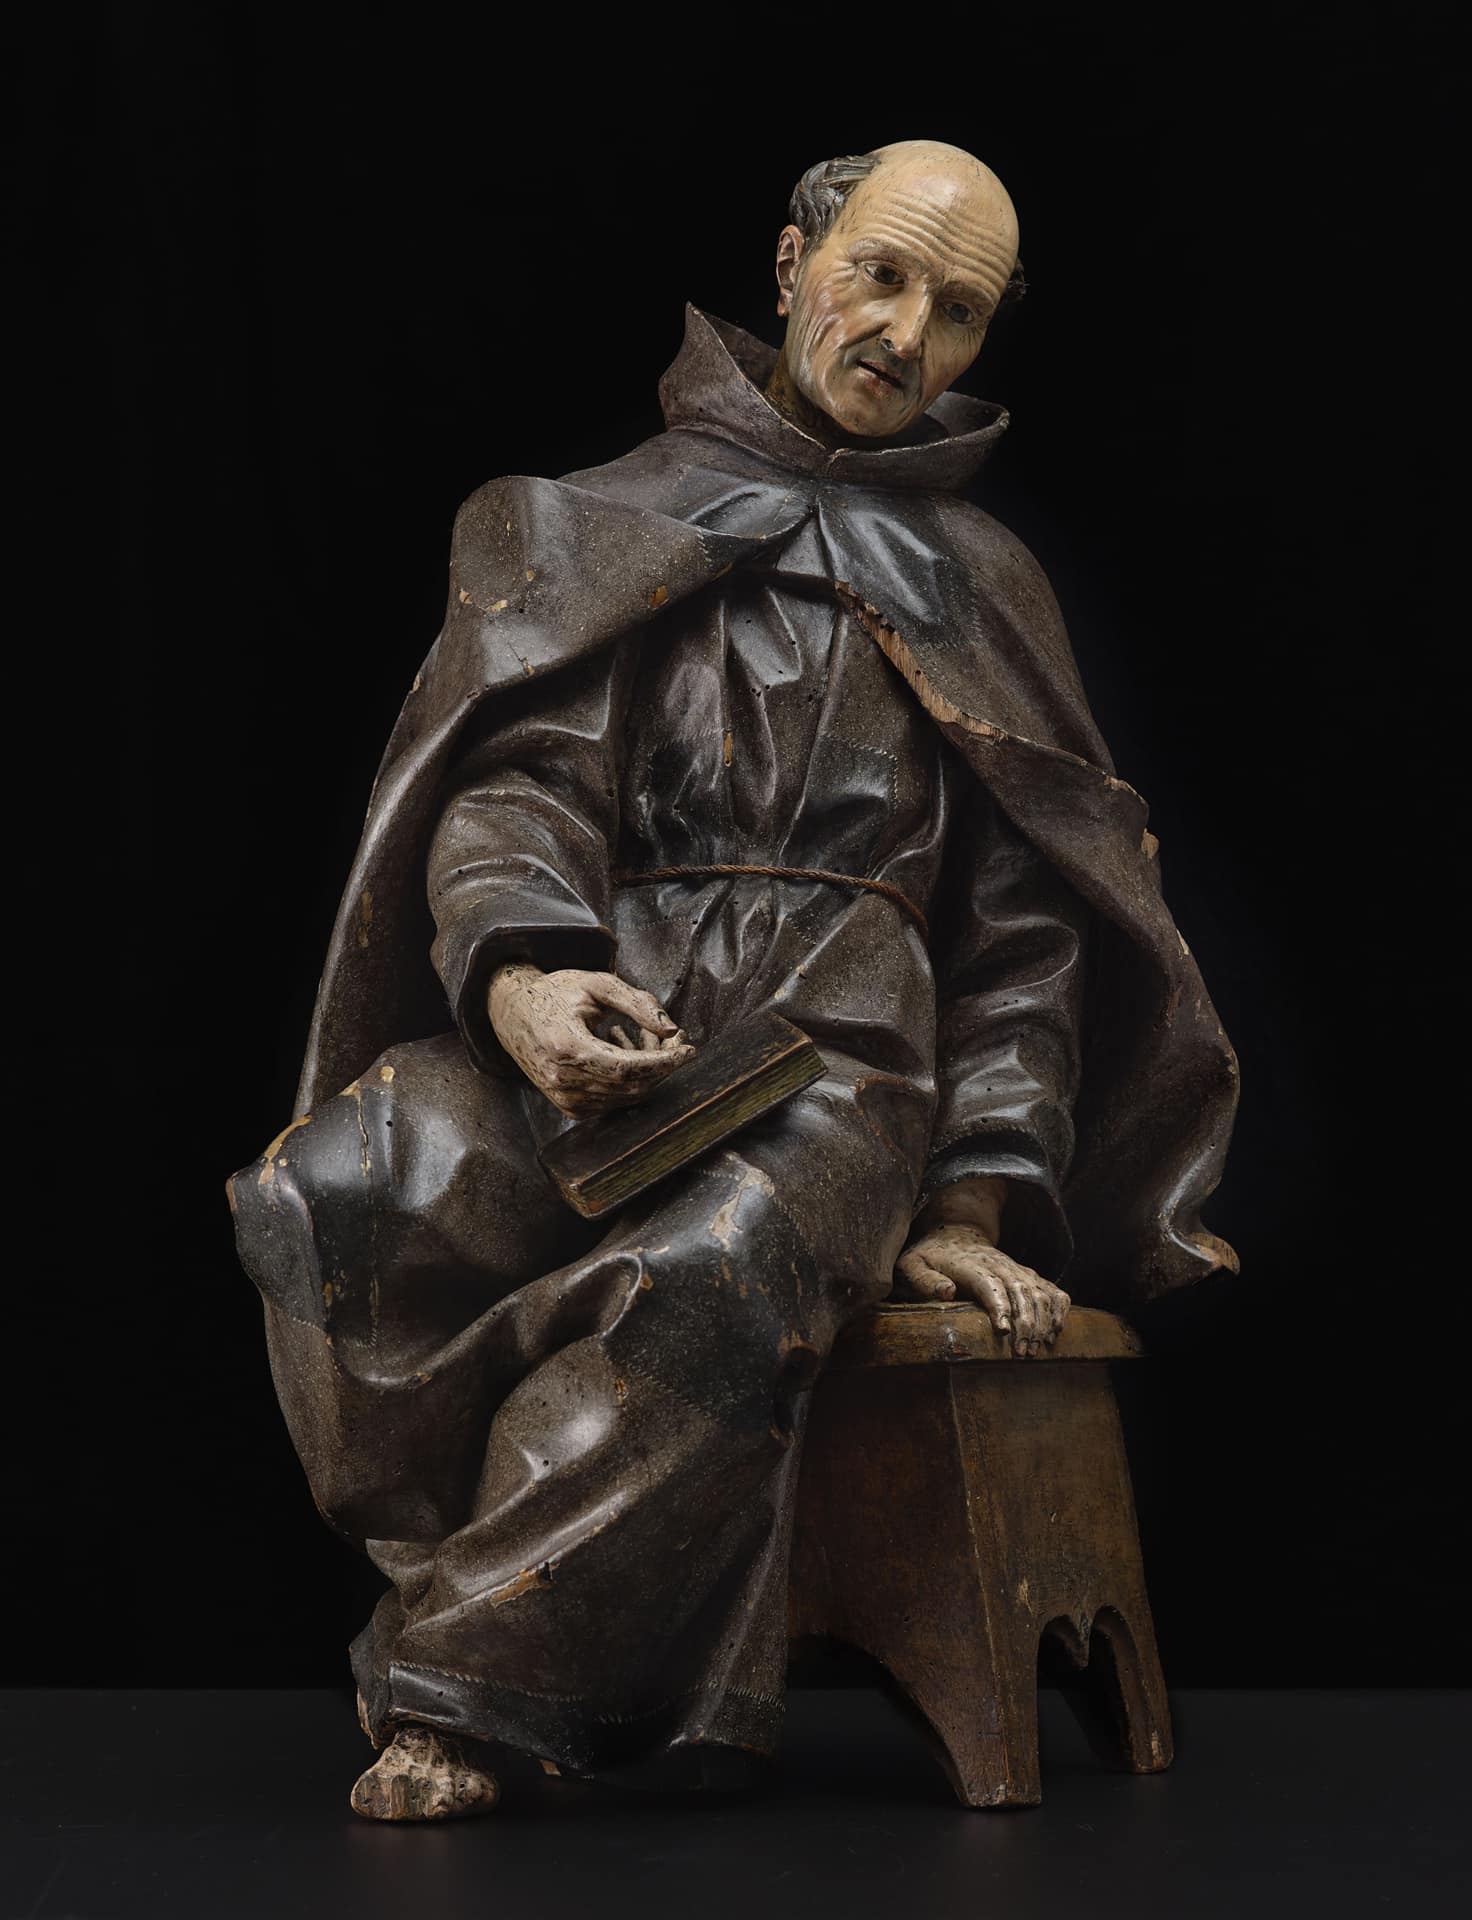 a wood sculpture of a man dressed in a monk's costume sitting on a bench with a book in his lap